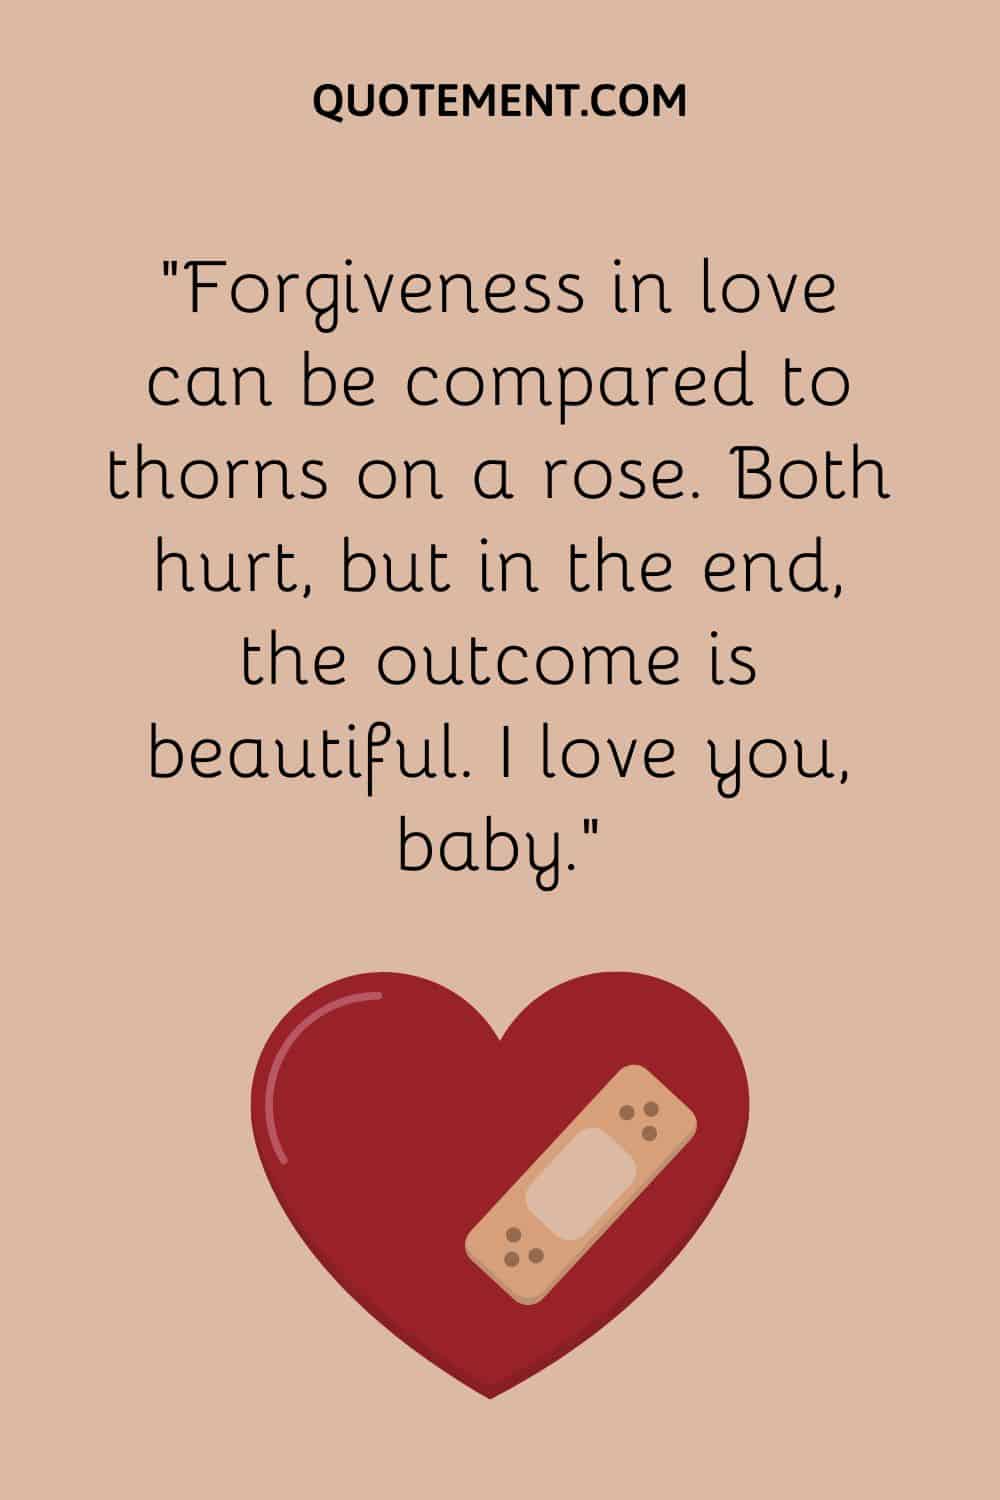 Forgiveness in love can be compared to thorns on a rose